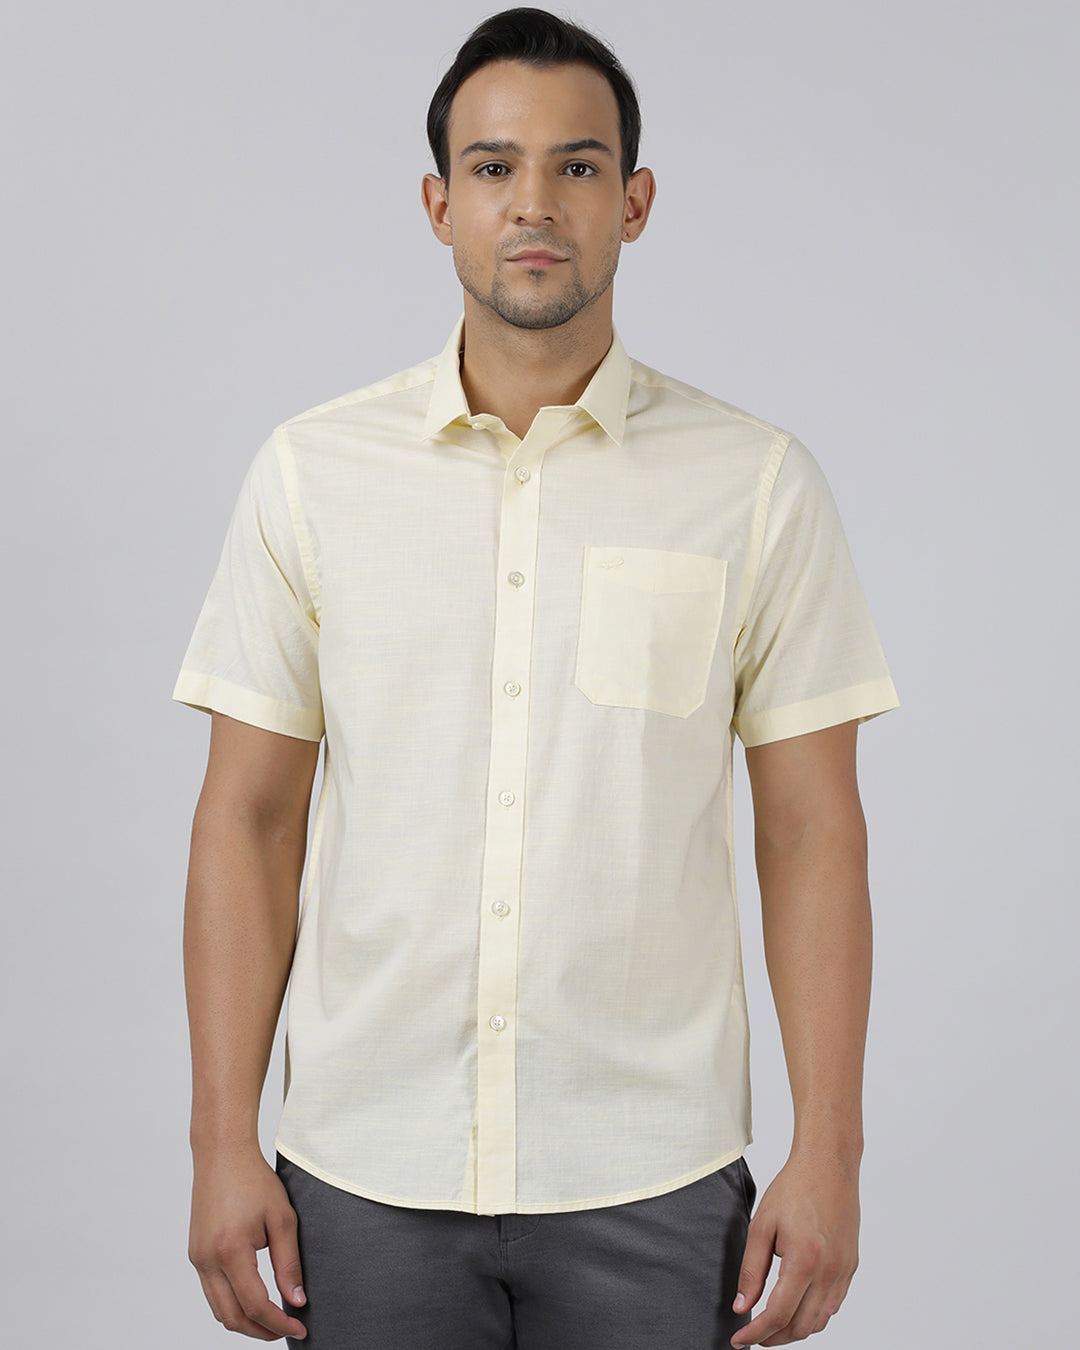 Casual Yellow Half Sleeve Regular Fit Solid Shirt with Collar for Men